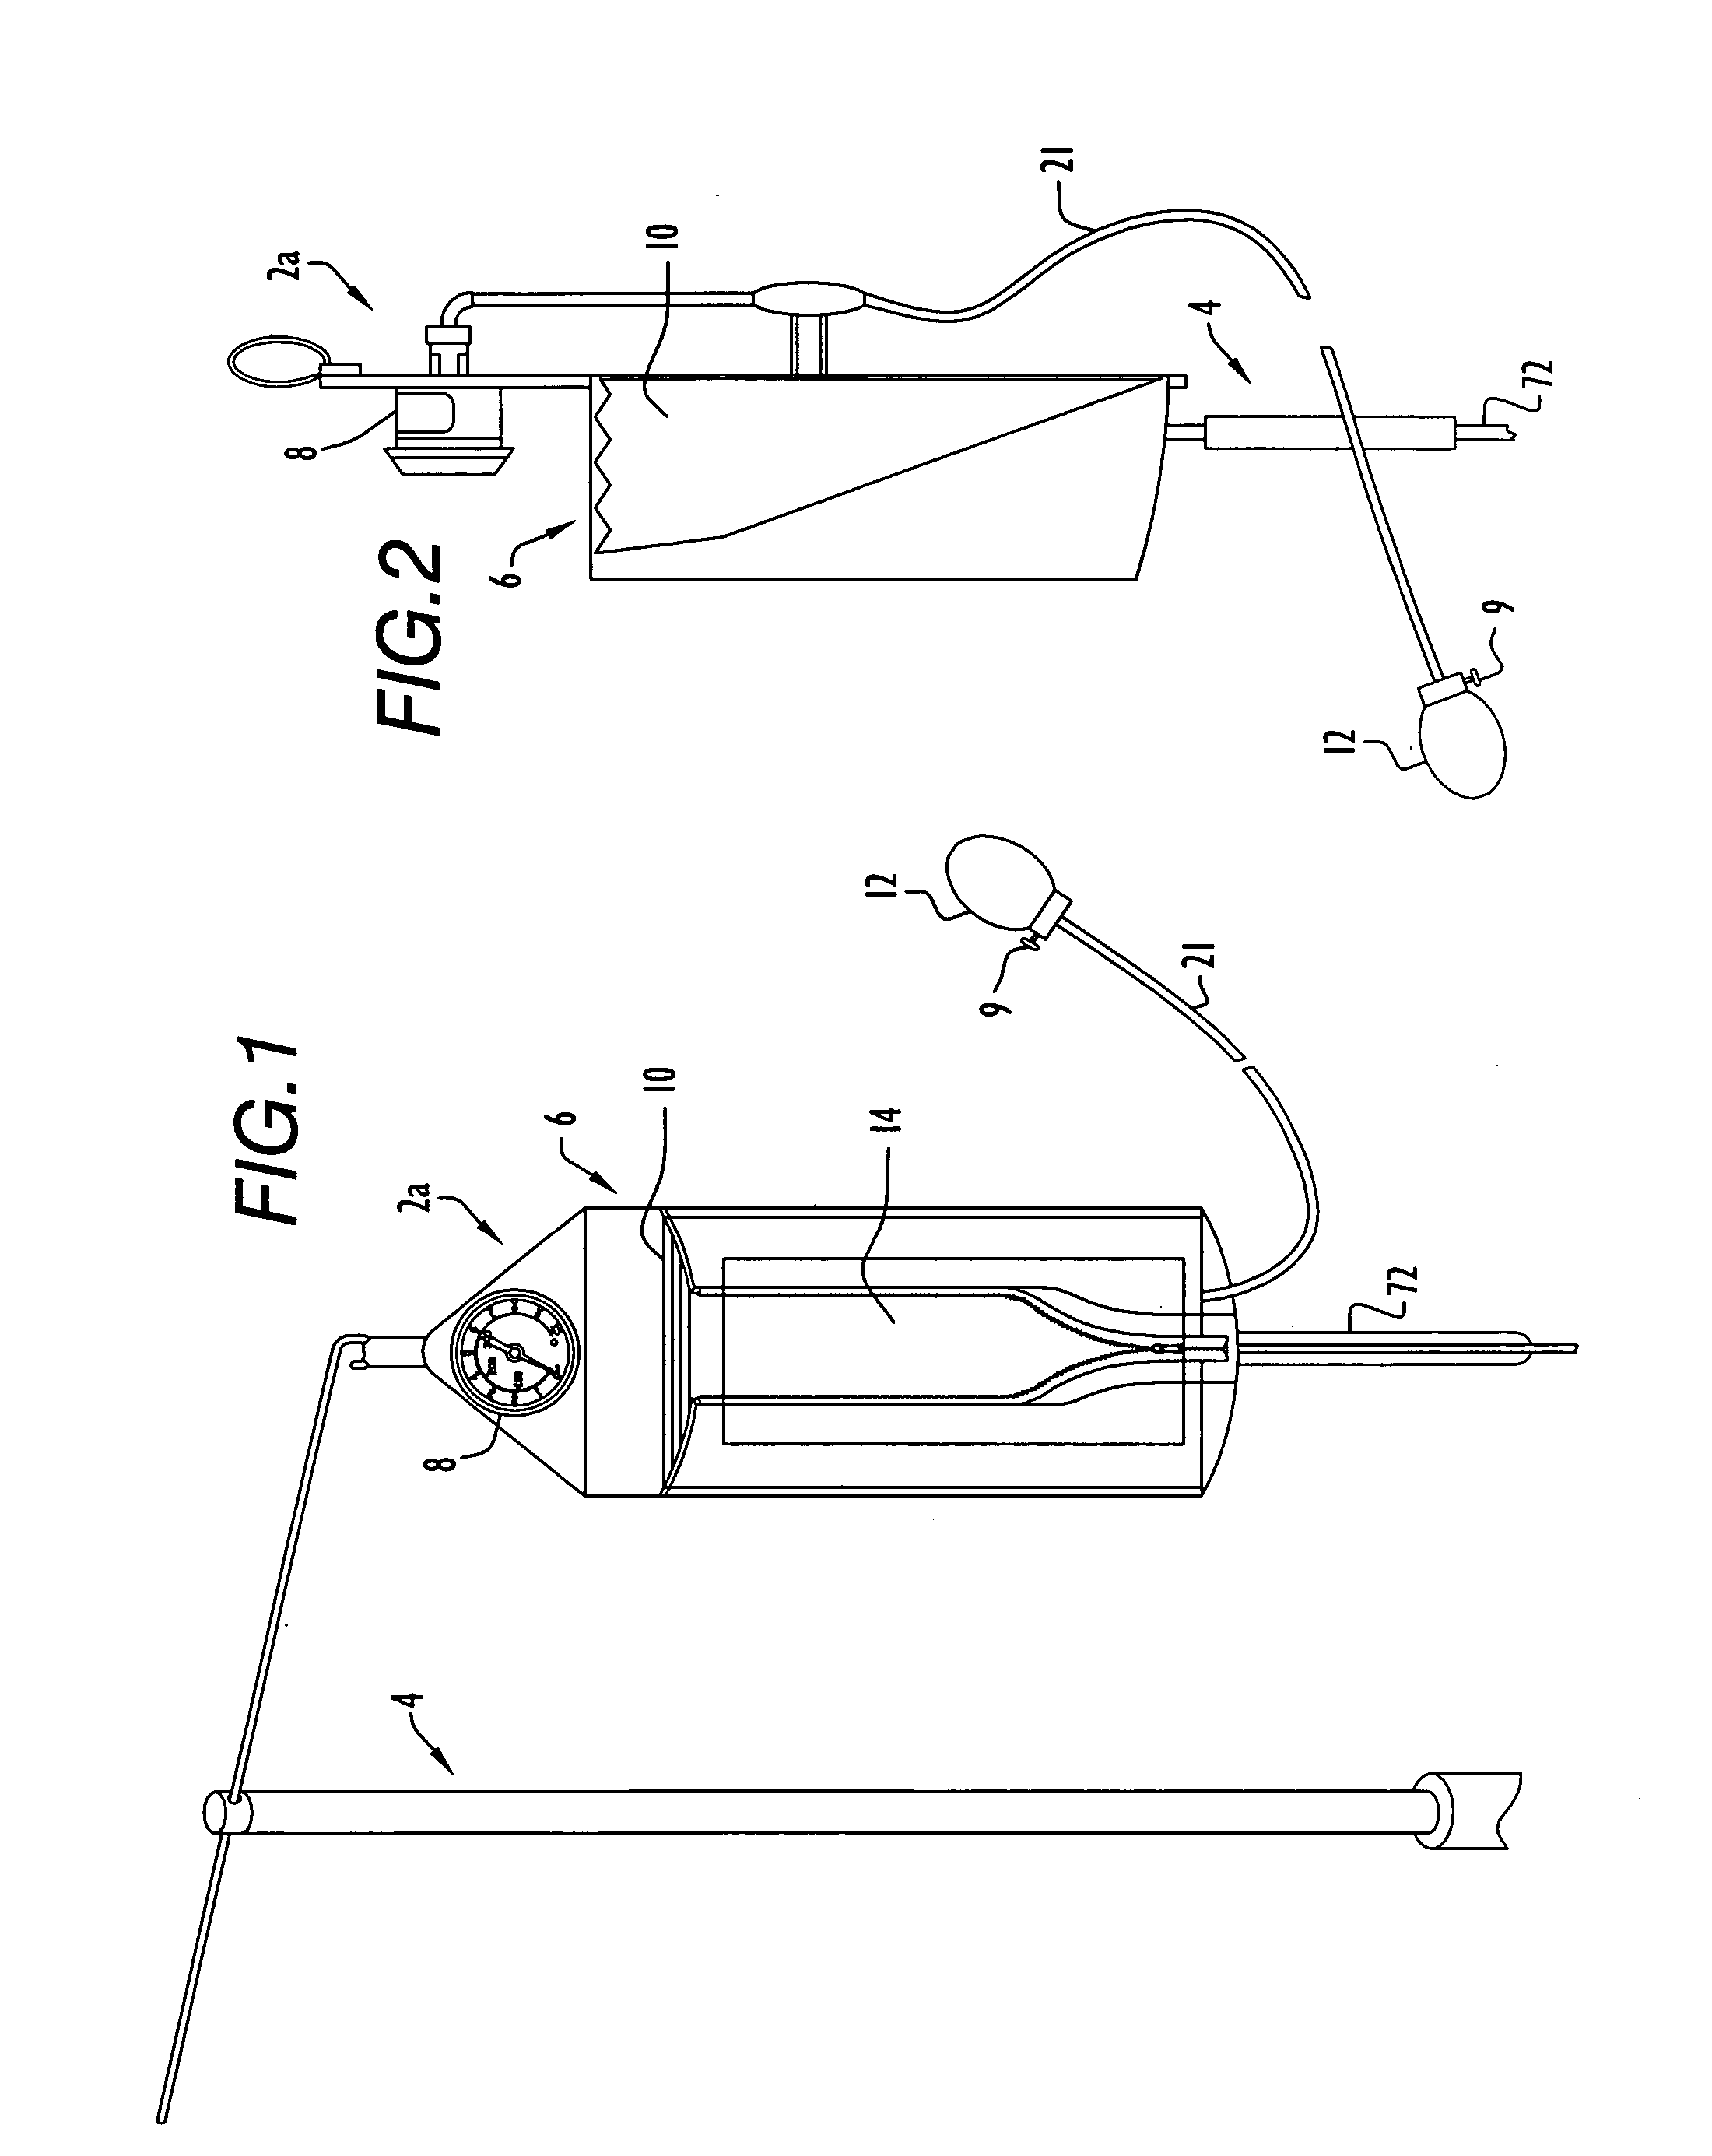 Method and apparatus for pressure infusion and temperature control of infused liquids